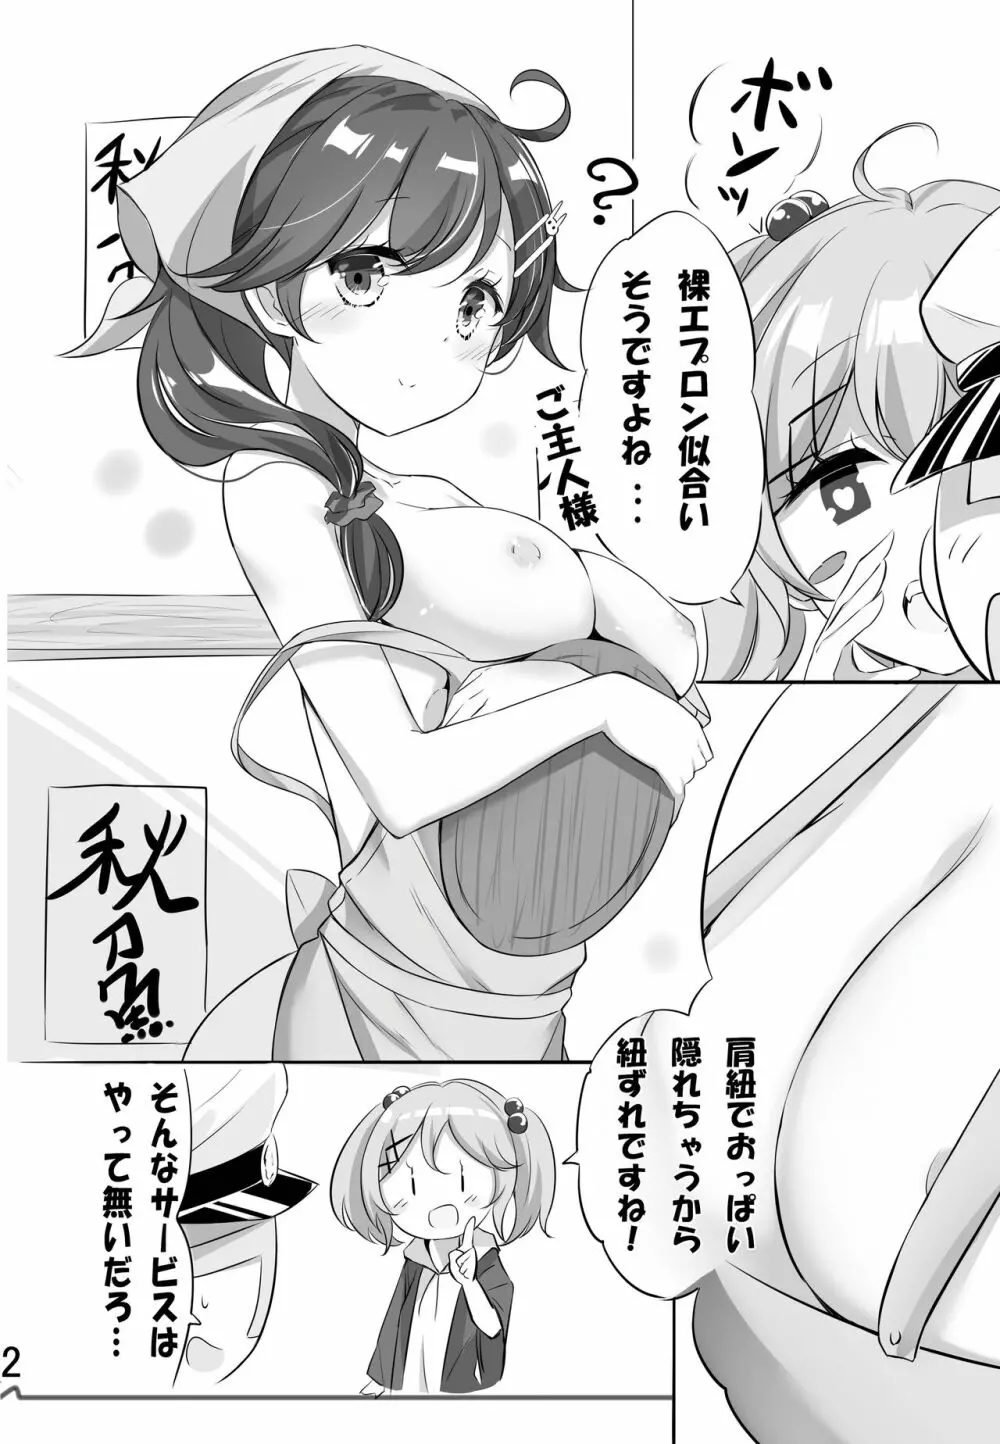 hamaken collection 総集編vol 9～12 プラス 七駆の乳くらべ - page69